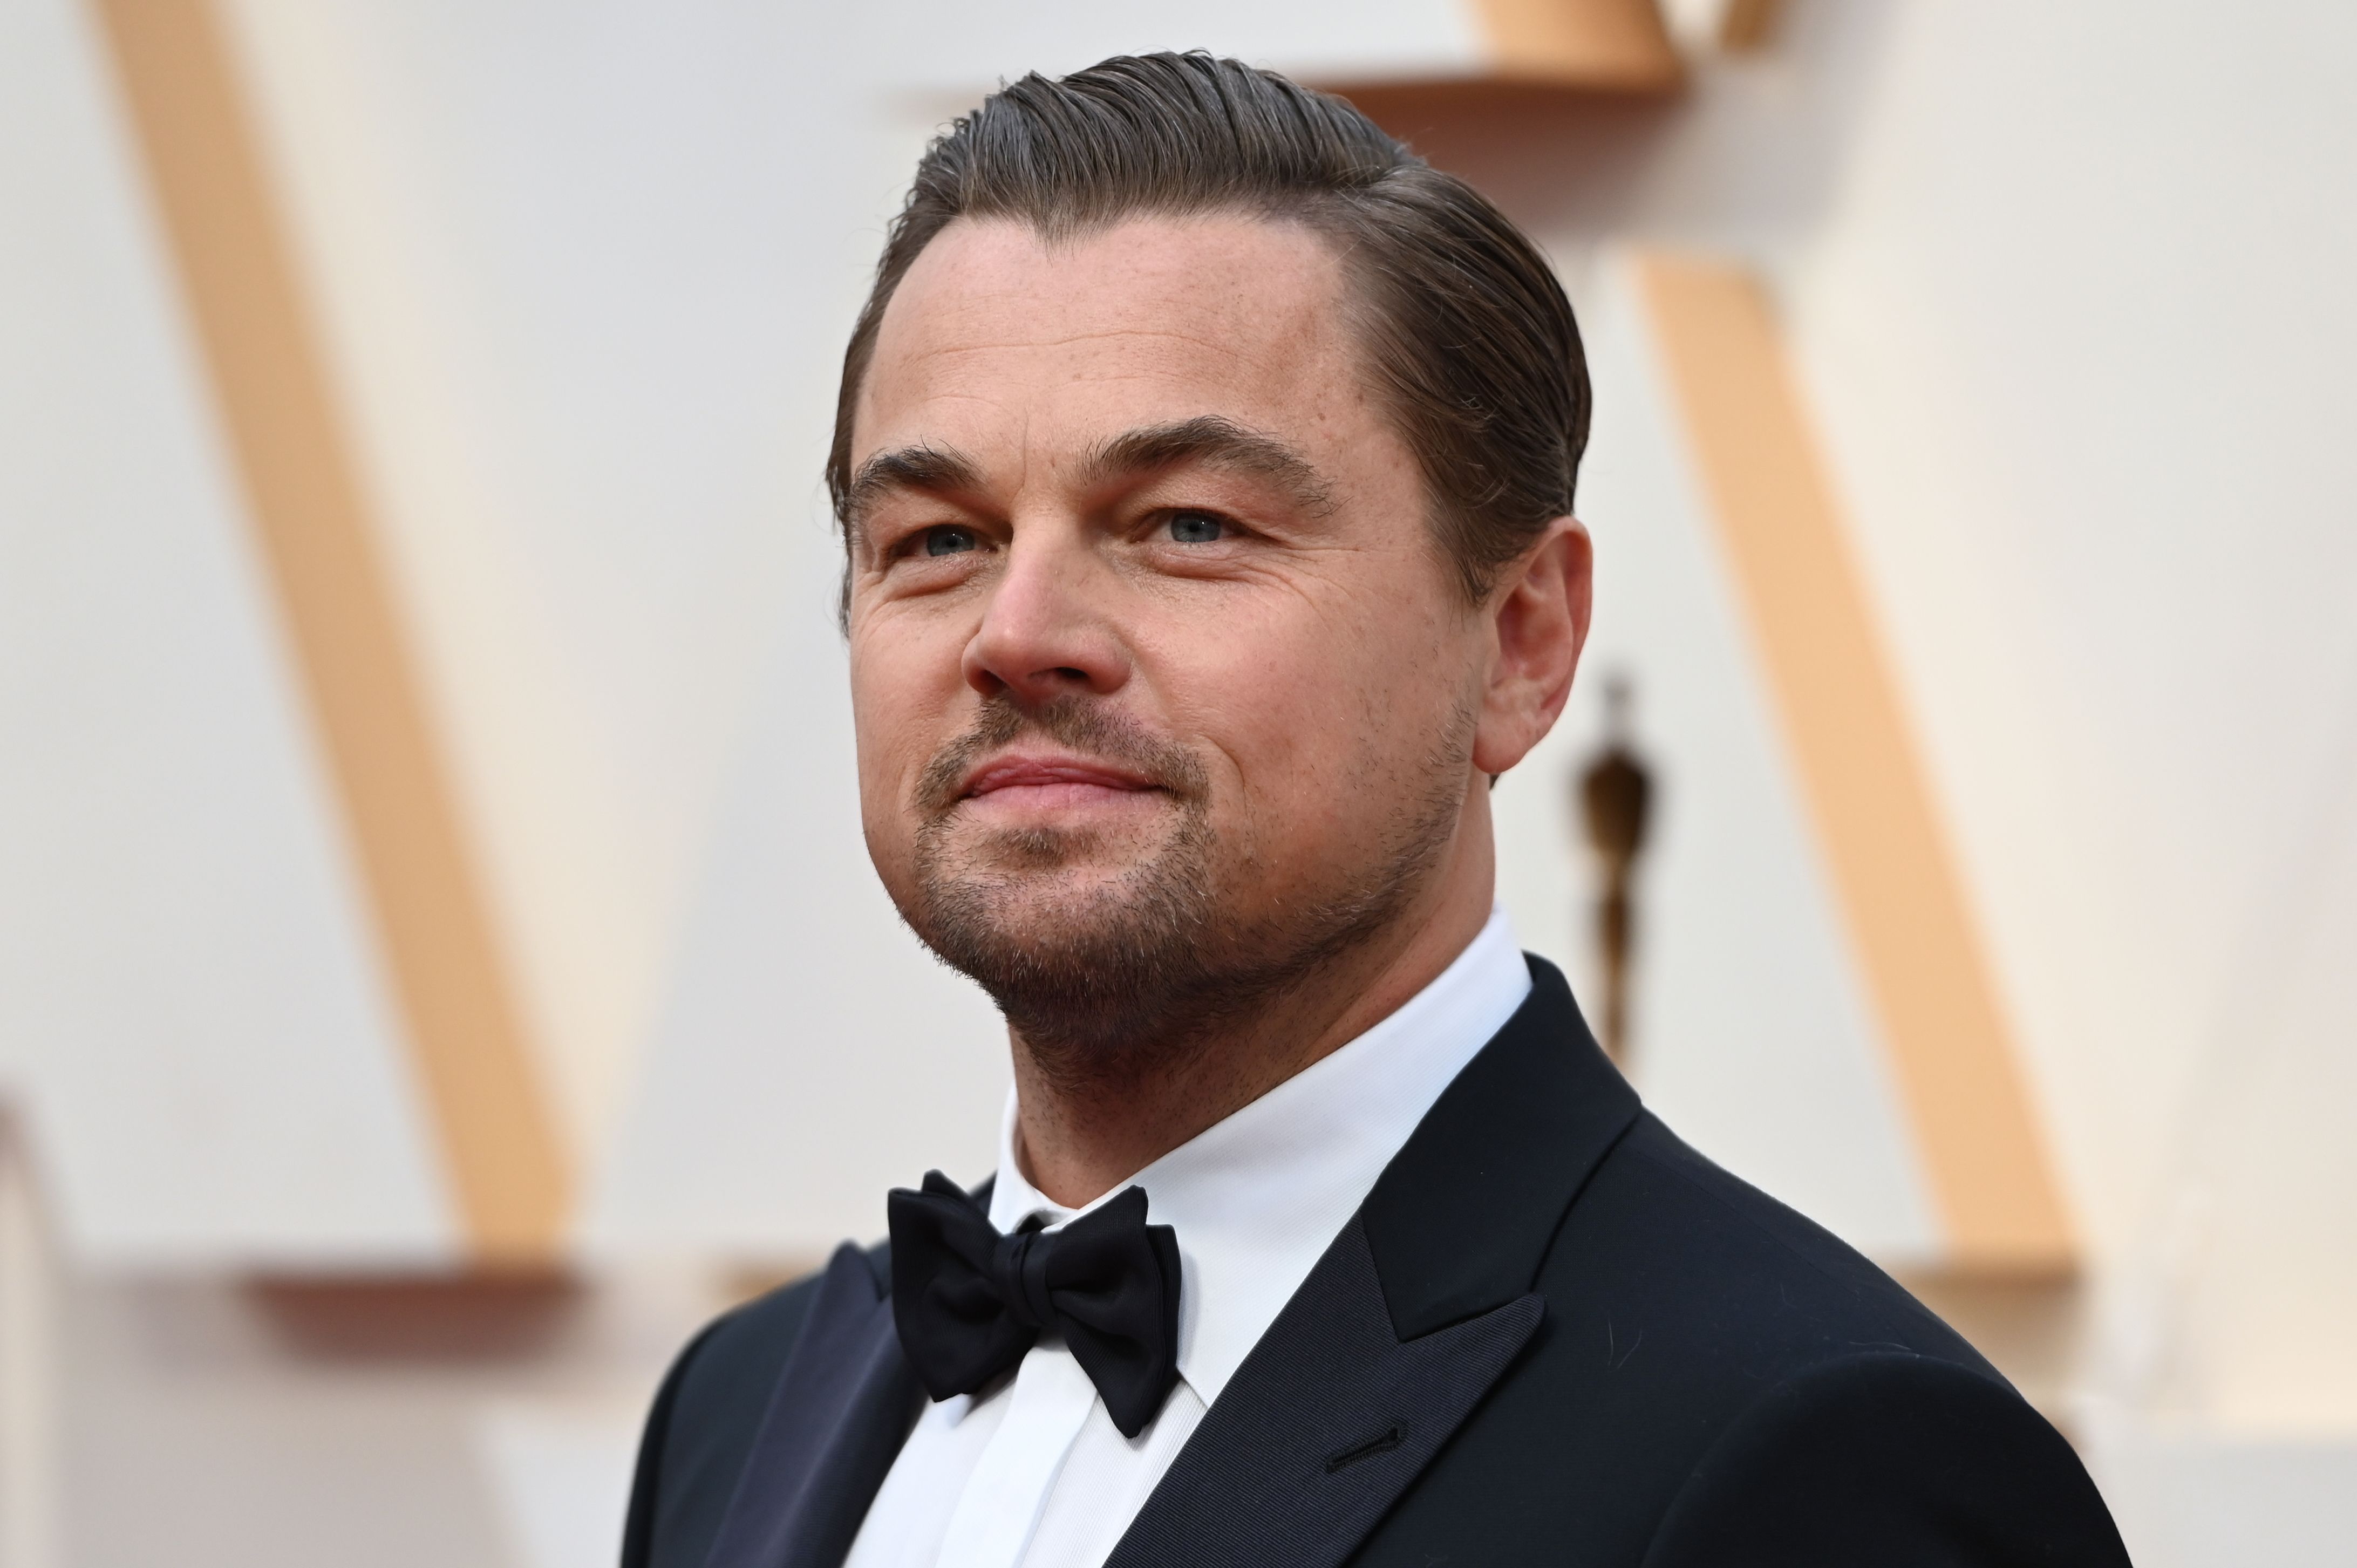 Leonardo DiCaprio arrives for the 92nd Oscars at the Dolby Theatre